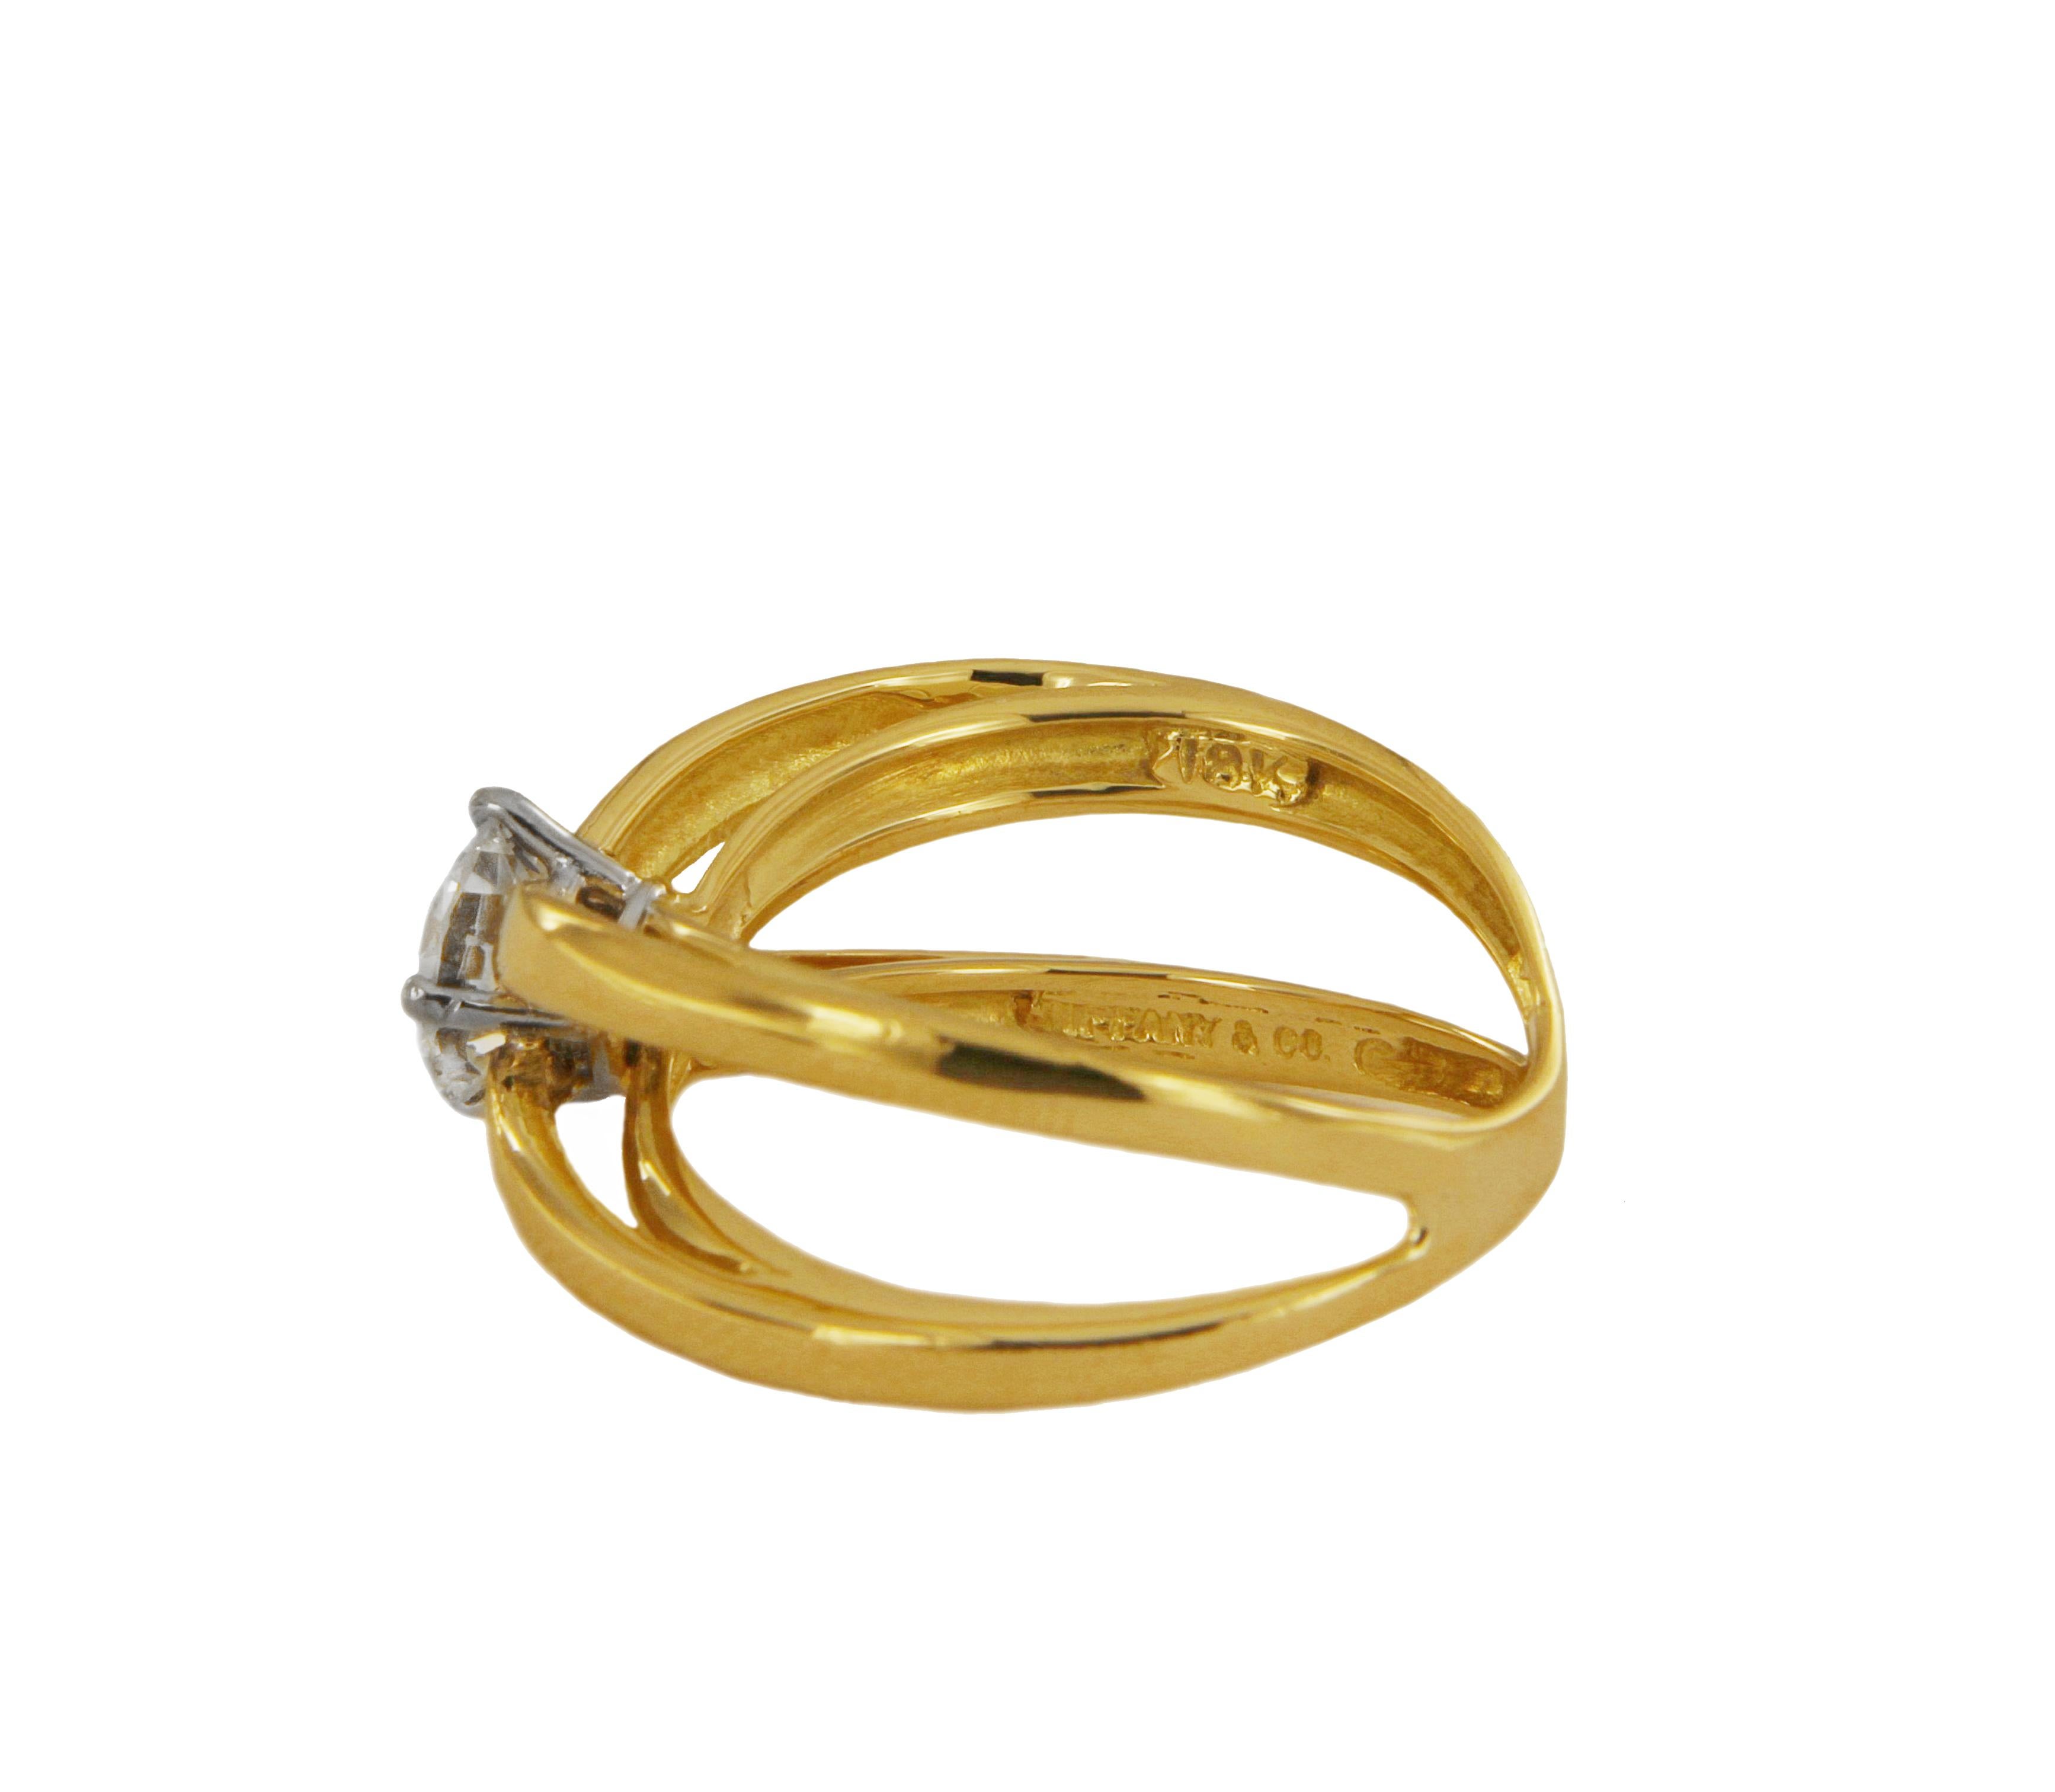 -Mint condtion

-18k yellow gold

-Ring size: 7.5

-Diamond: 0.98 ct, VVS clarity, E color

-Comes with Tiffany box